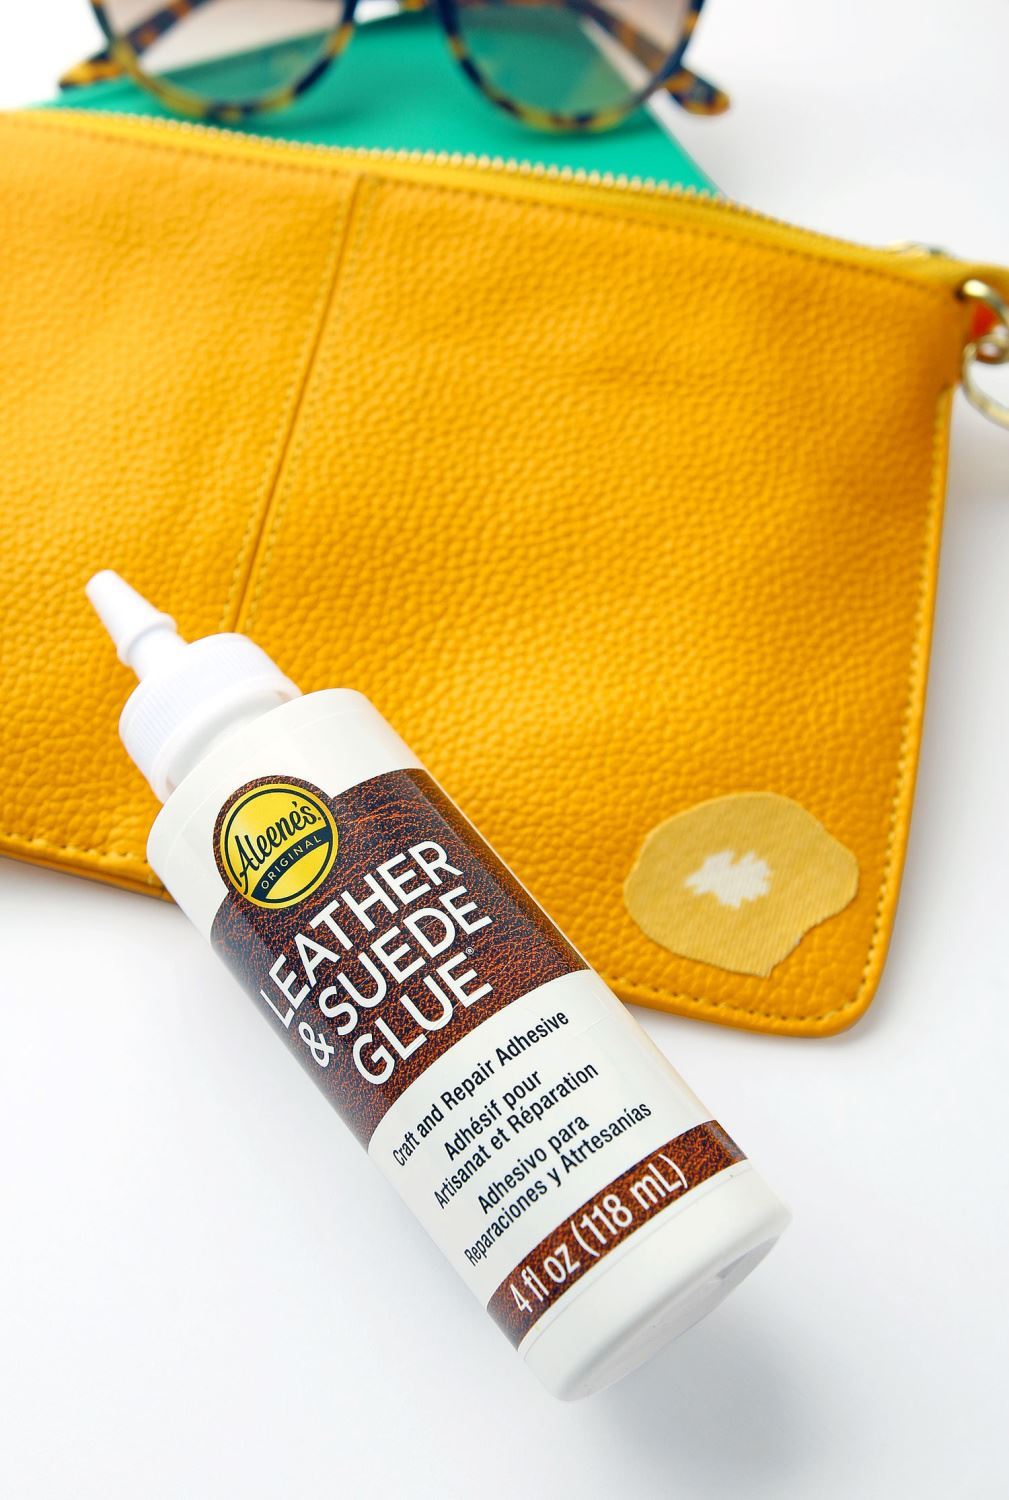 Aleene's Original Glues - How To Repair a Leather Tear with